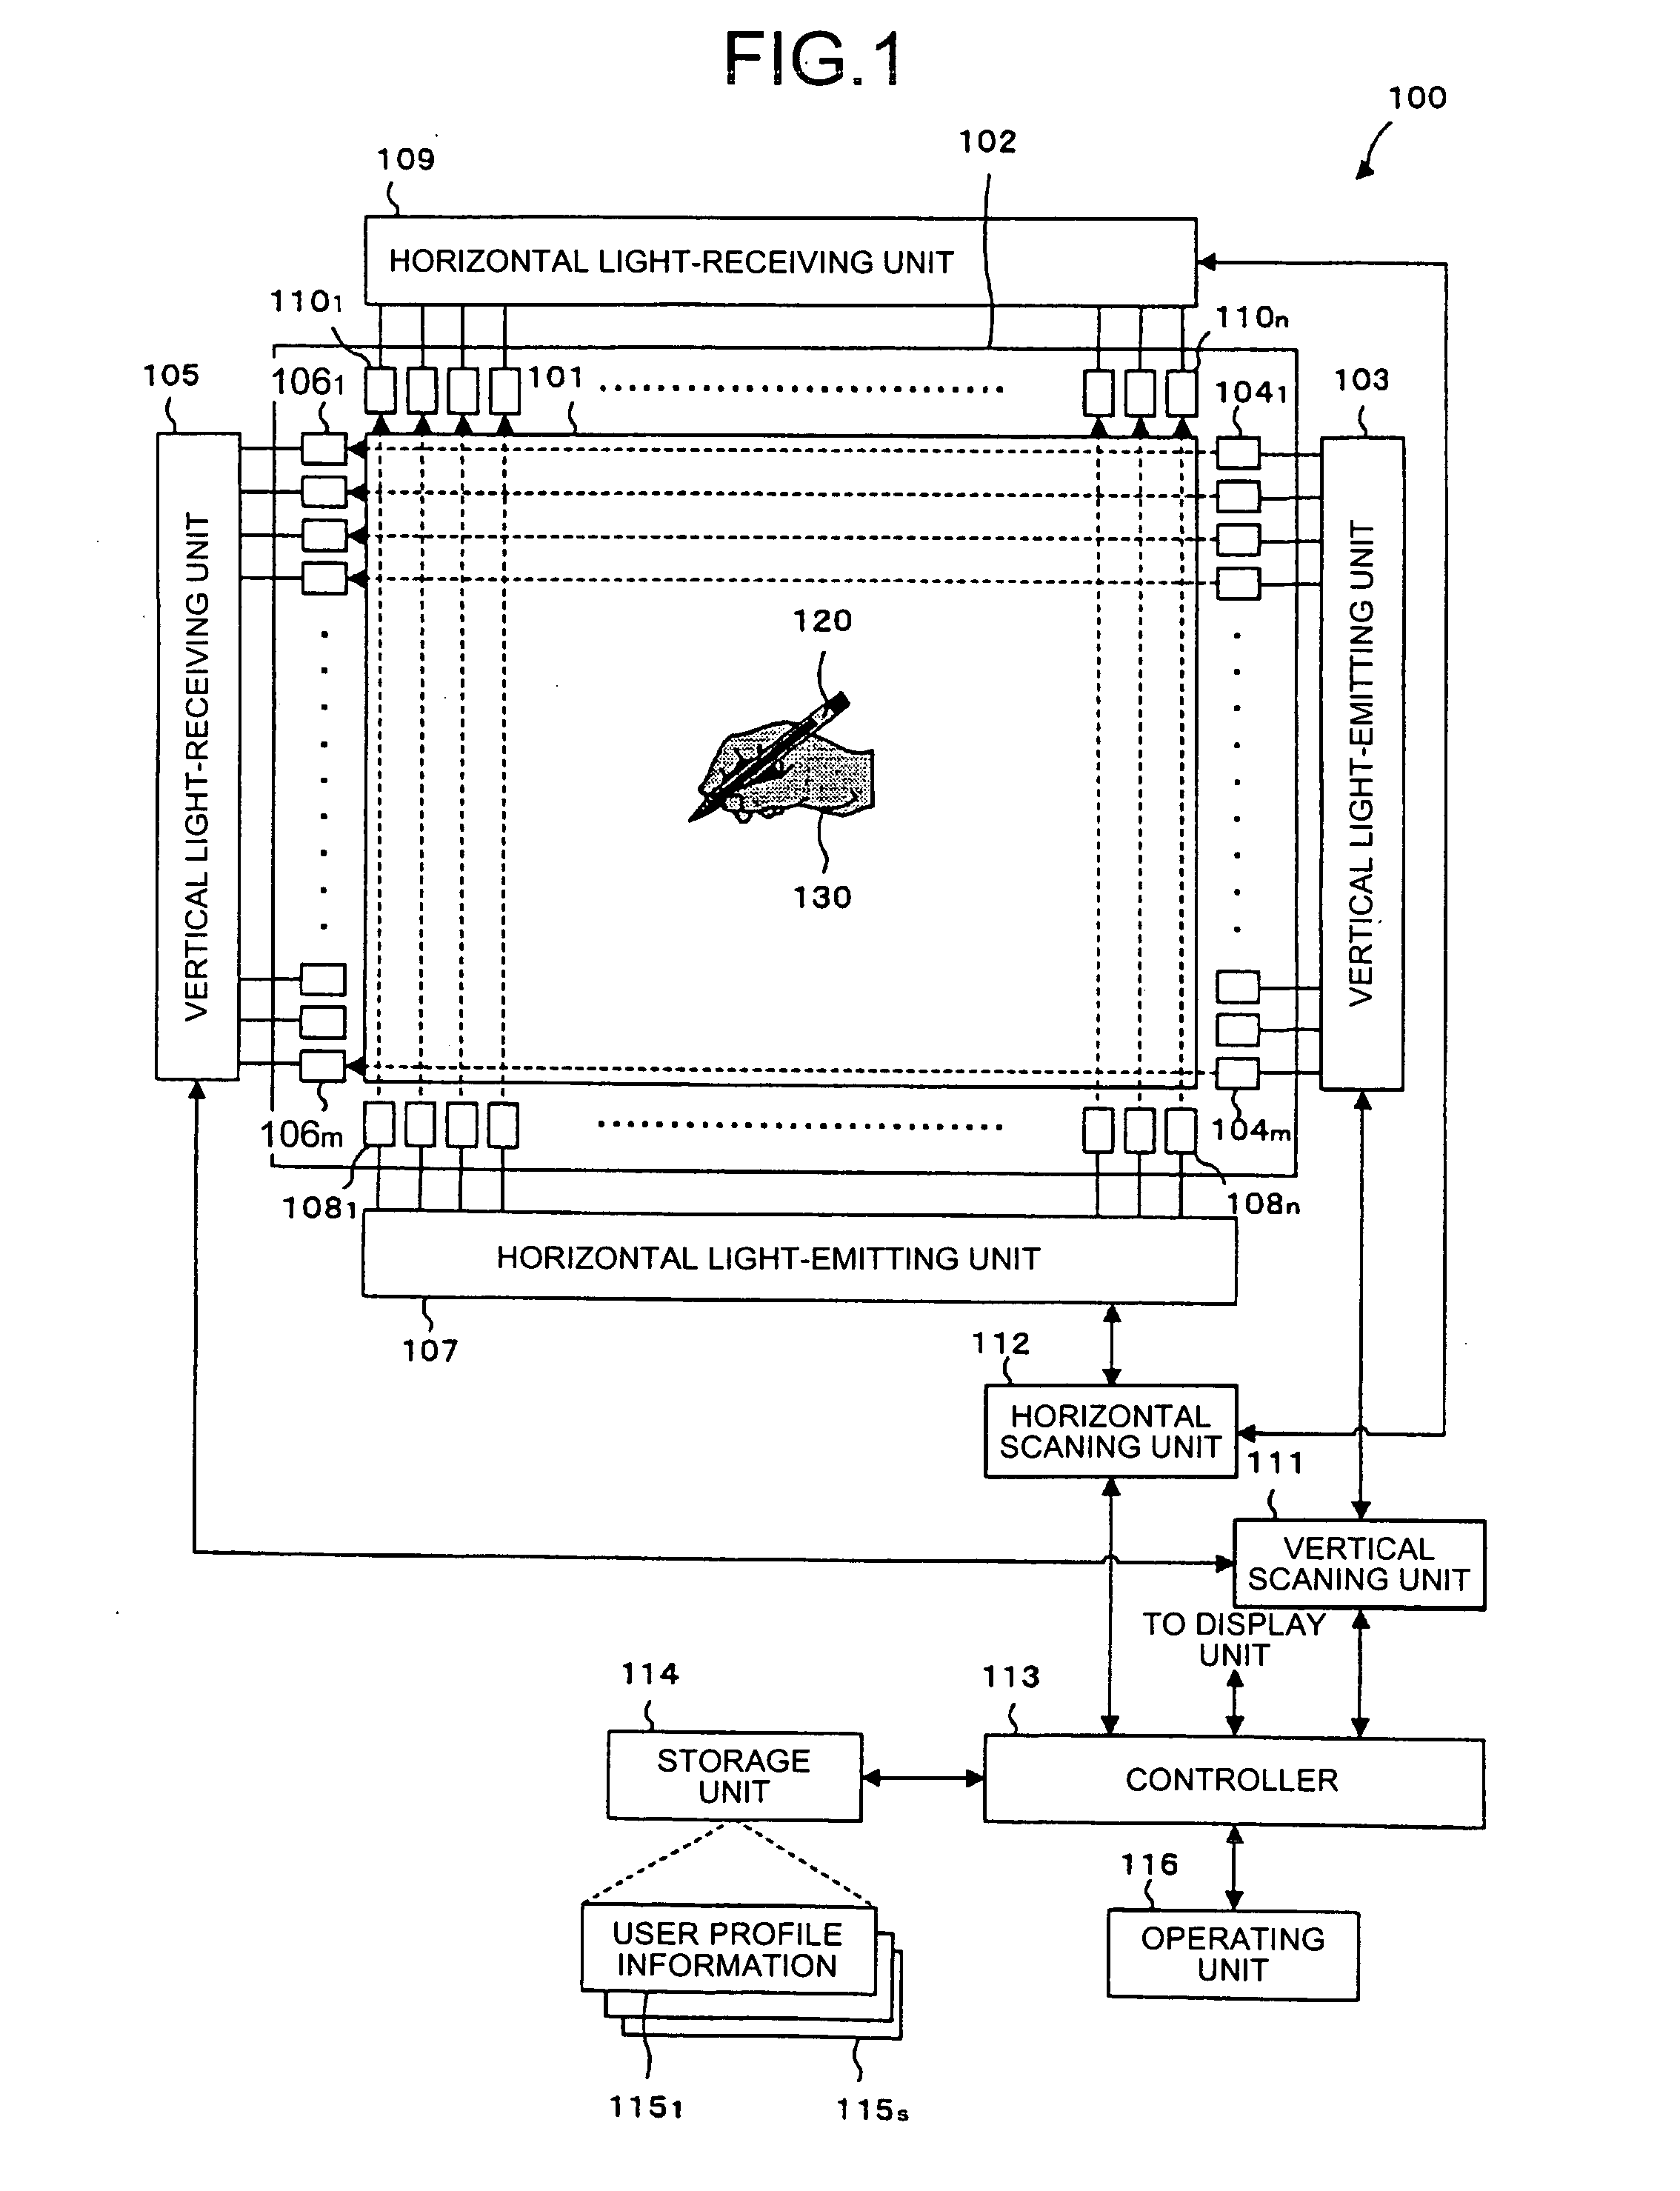 Touch panel apparatus, method of detecting touch area, and computer product